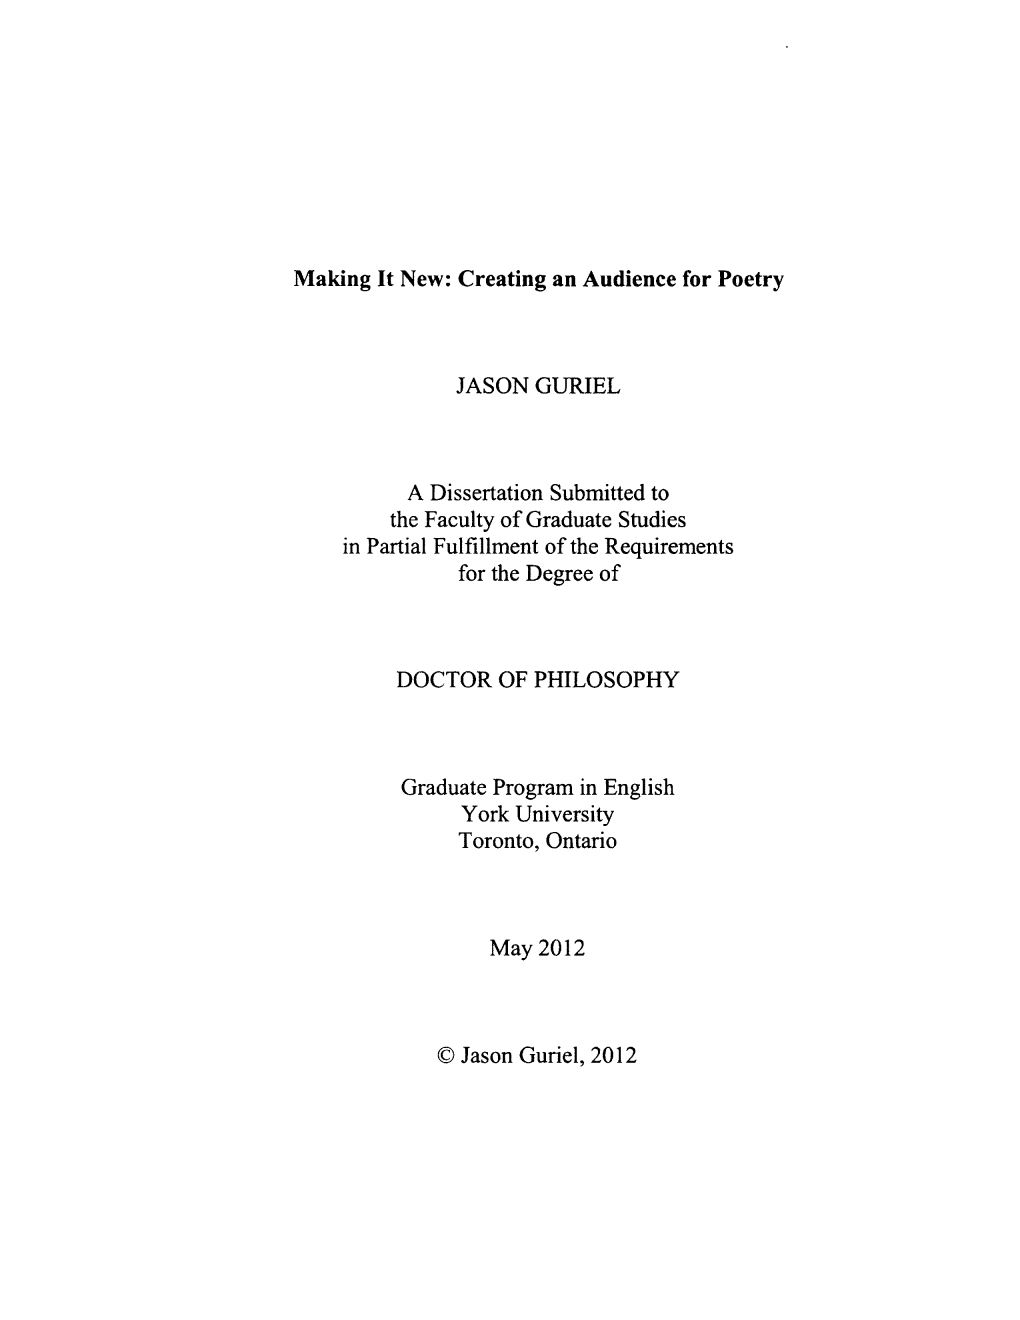 Making It New: Creating an Audience for Poetry JASON GURIEL a Dissertation Submitted to the Faculty of Graduate Studies in Parti